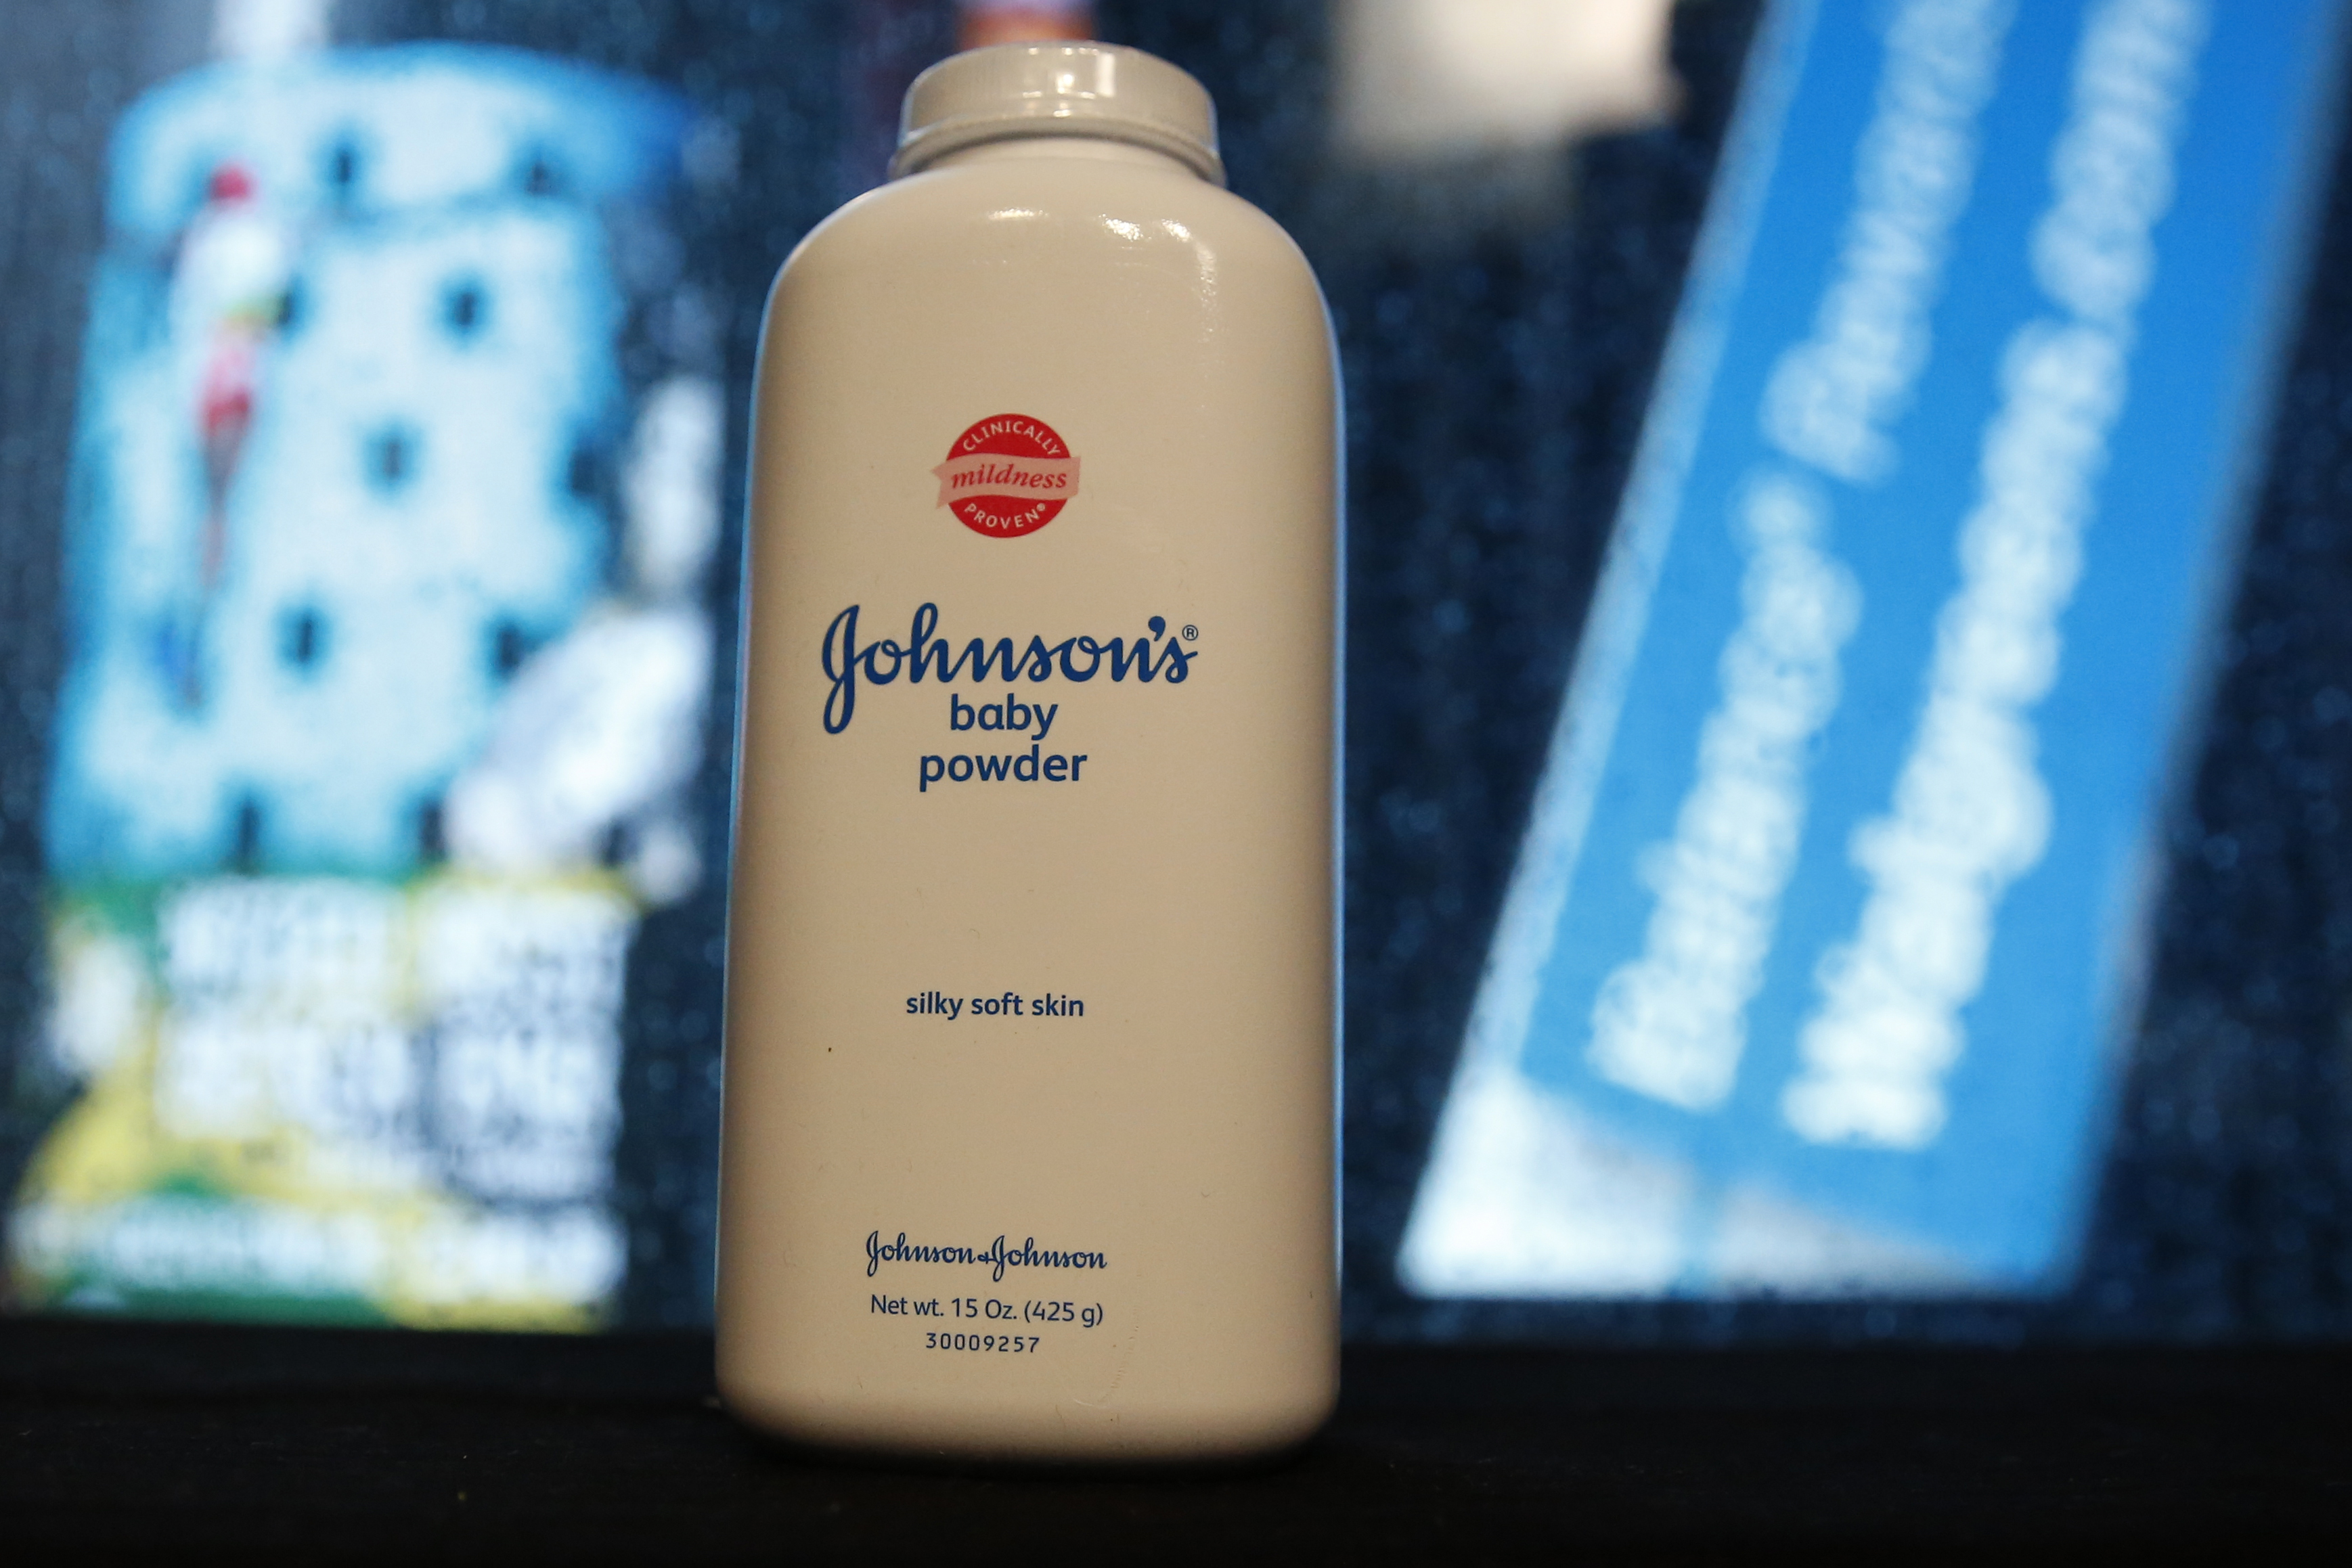 A bottle of Johnson's Baby Powder is seen in a photo illustration taken in New York